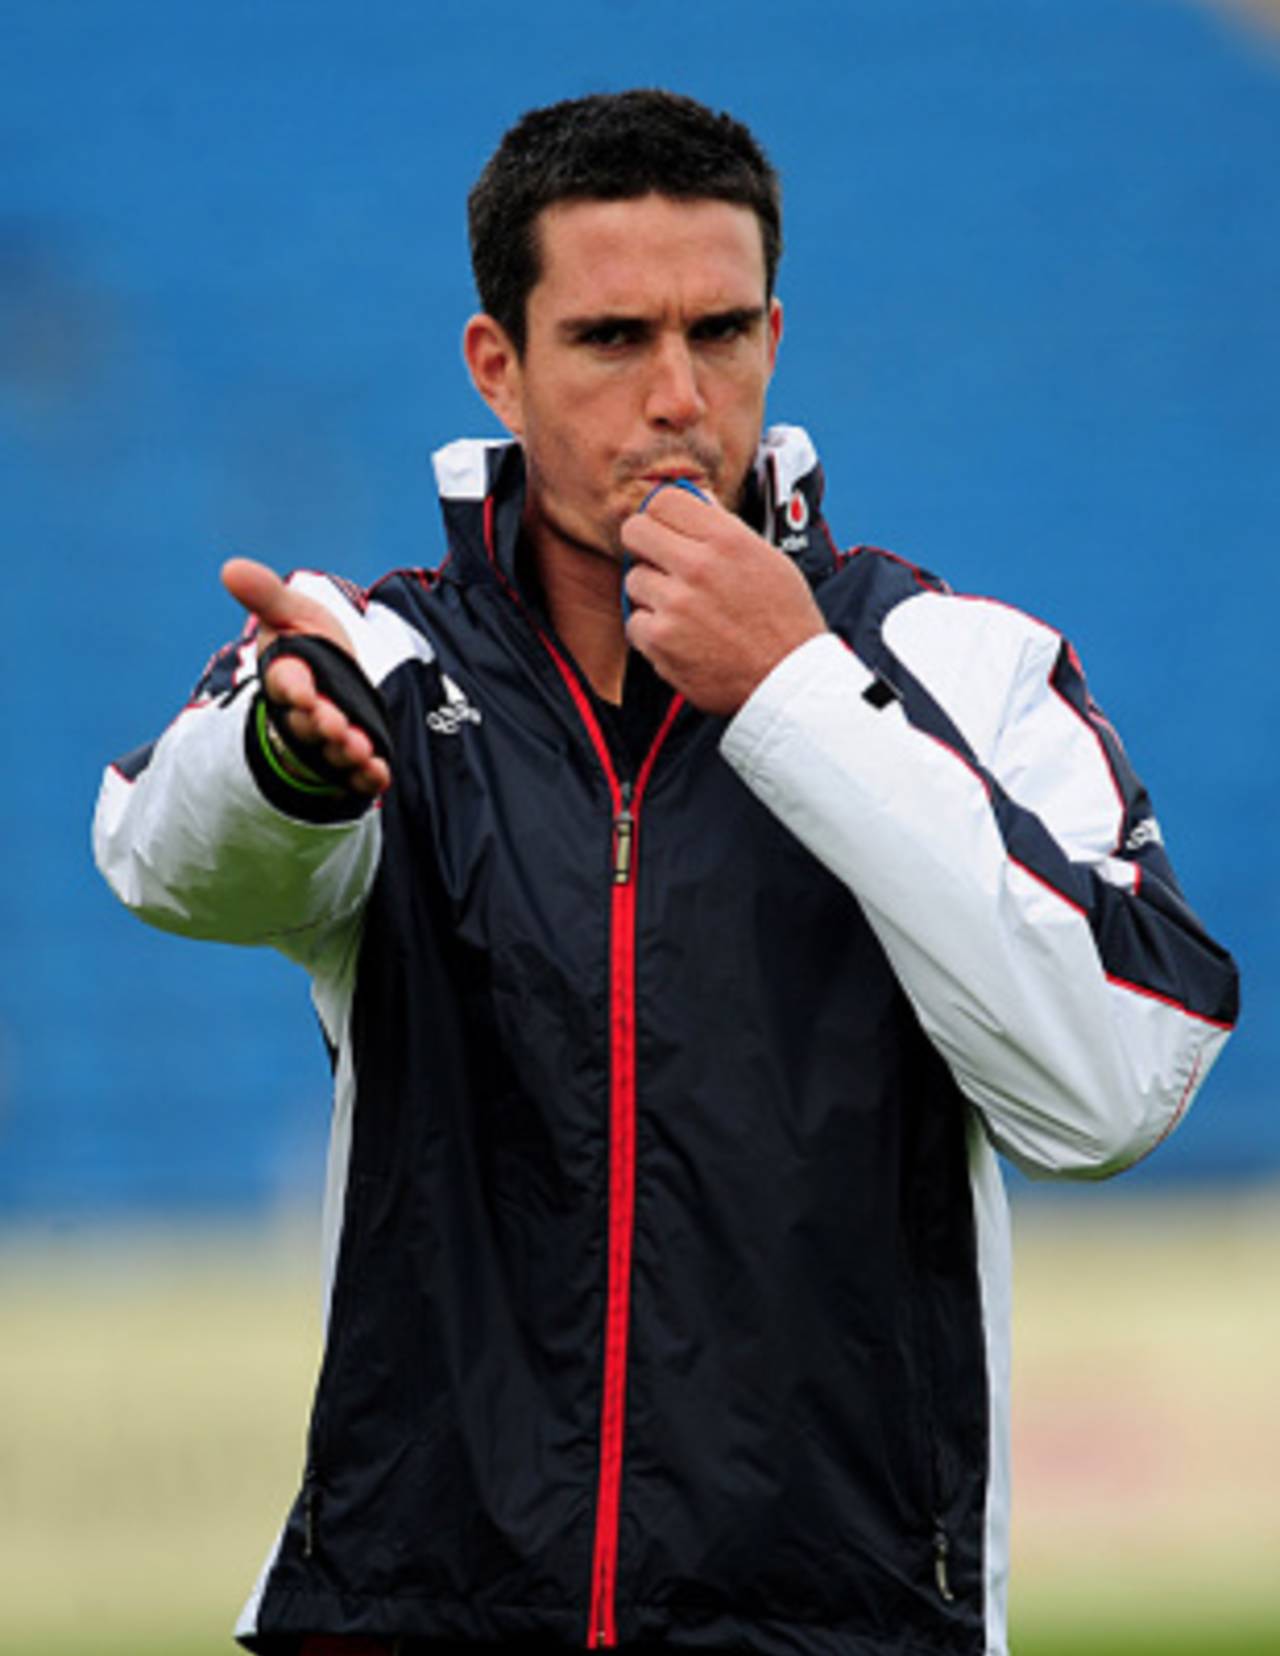 England's premier batsman, Kevin Pietersen, turns football referee ahead of the first ODI against West Indies, Headingley, April 20, 2009